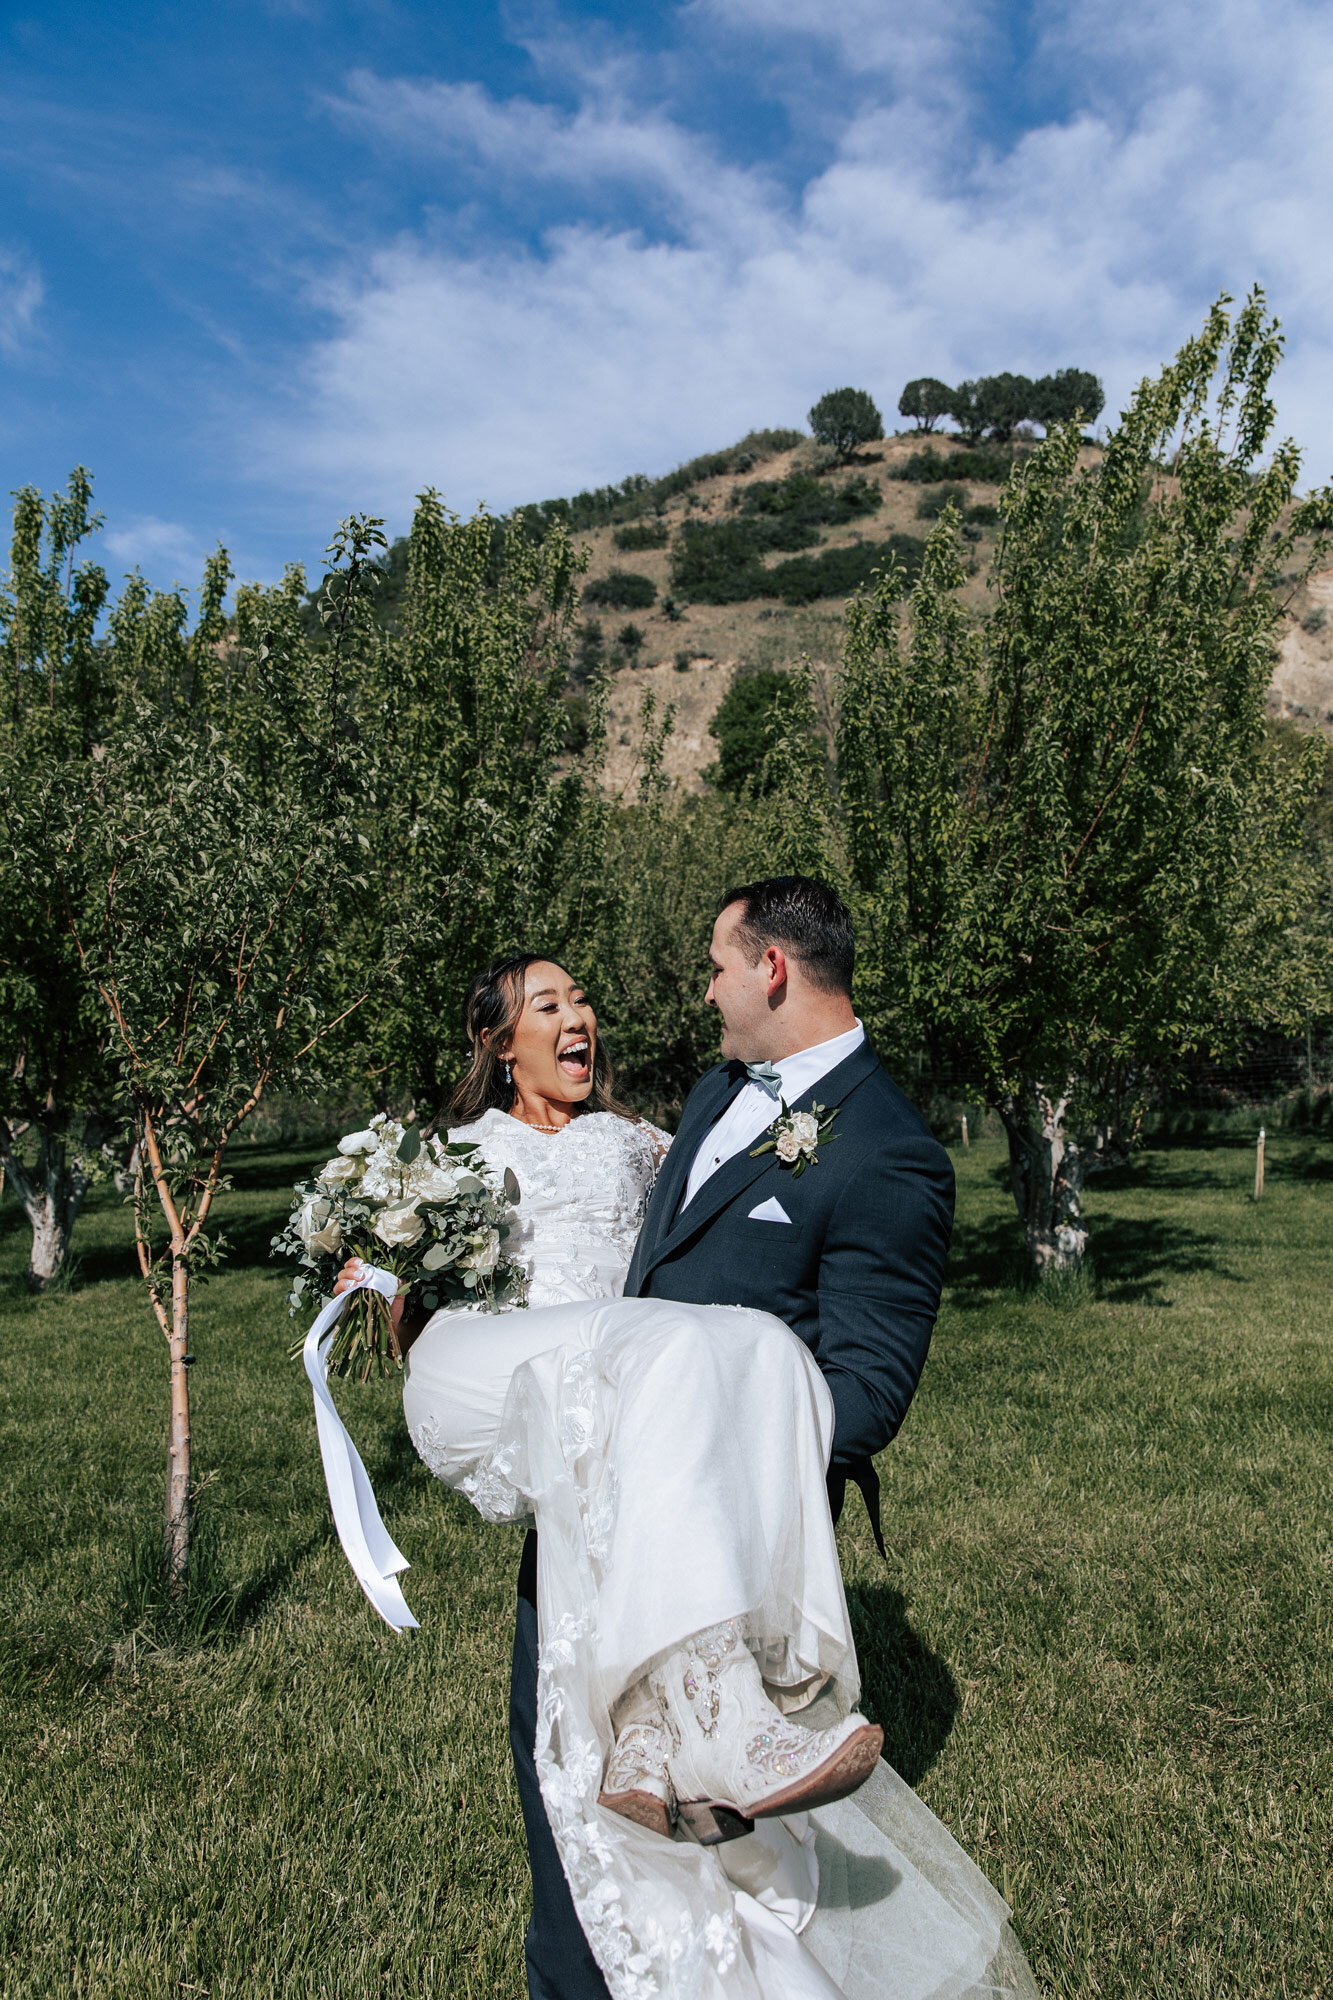  Emily Jenkins Photography captures the groom holding his bride in his arms as she laughs happily at him in front of an orchard in Mapleton, Utah. white wedding cowgirl boots boots and dress #emilyjenkinsphotography #emilyjenkinsweddings #utahwedding